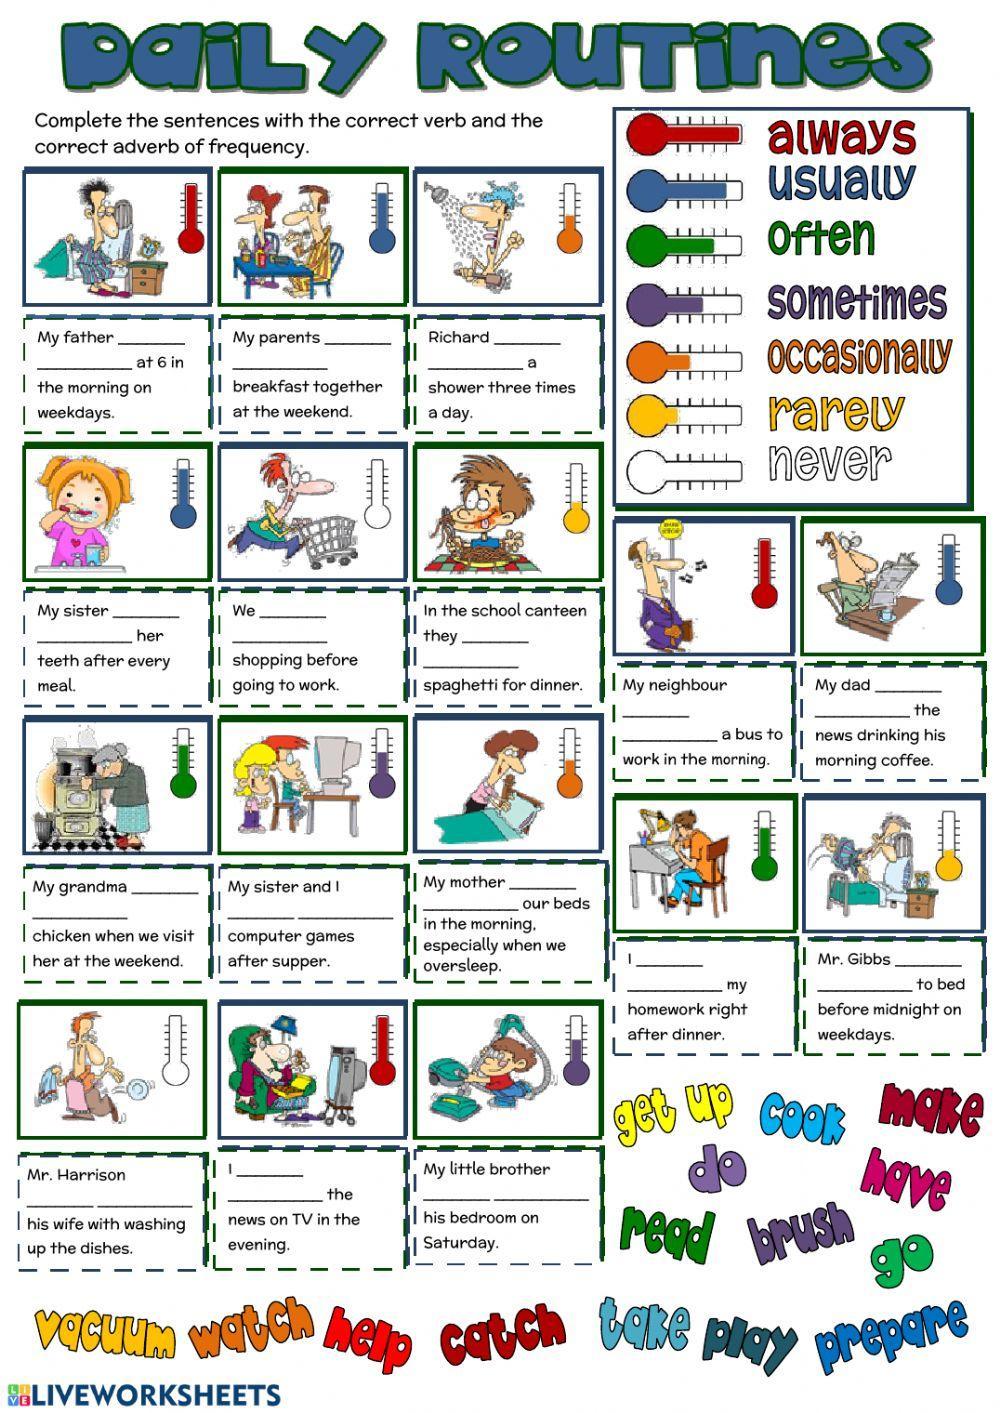 Adverbs games. Игры на Daily Routine. Упражнения Daily Routine present simple. Worksheets грамматика. Always usually sometimes never Worksheet.